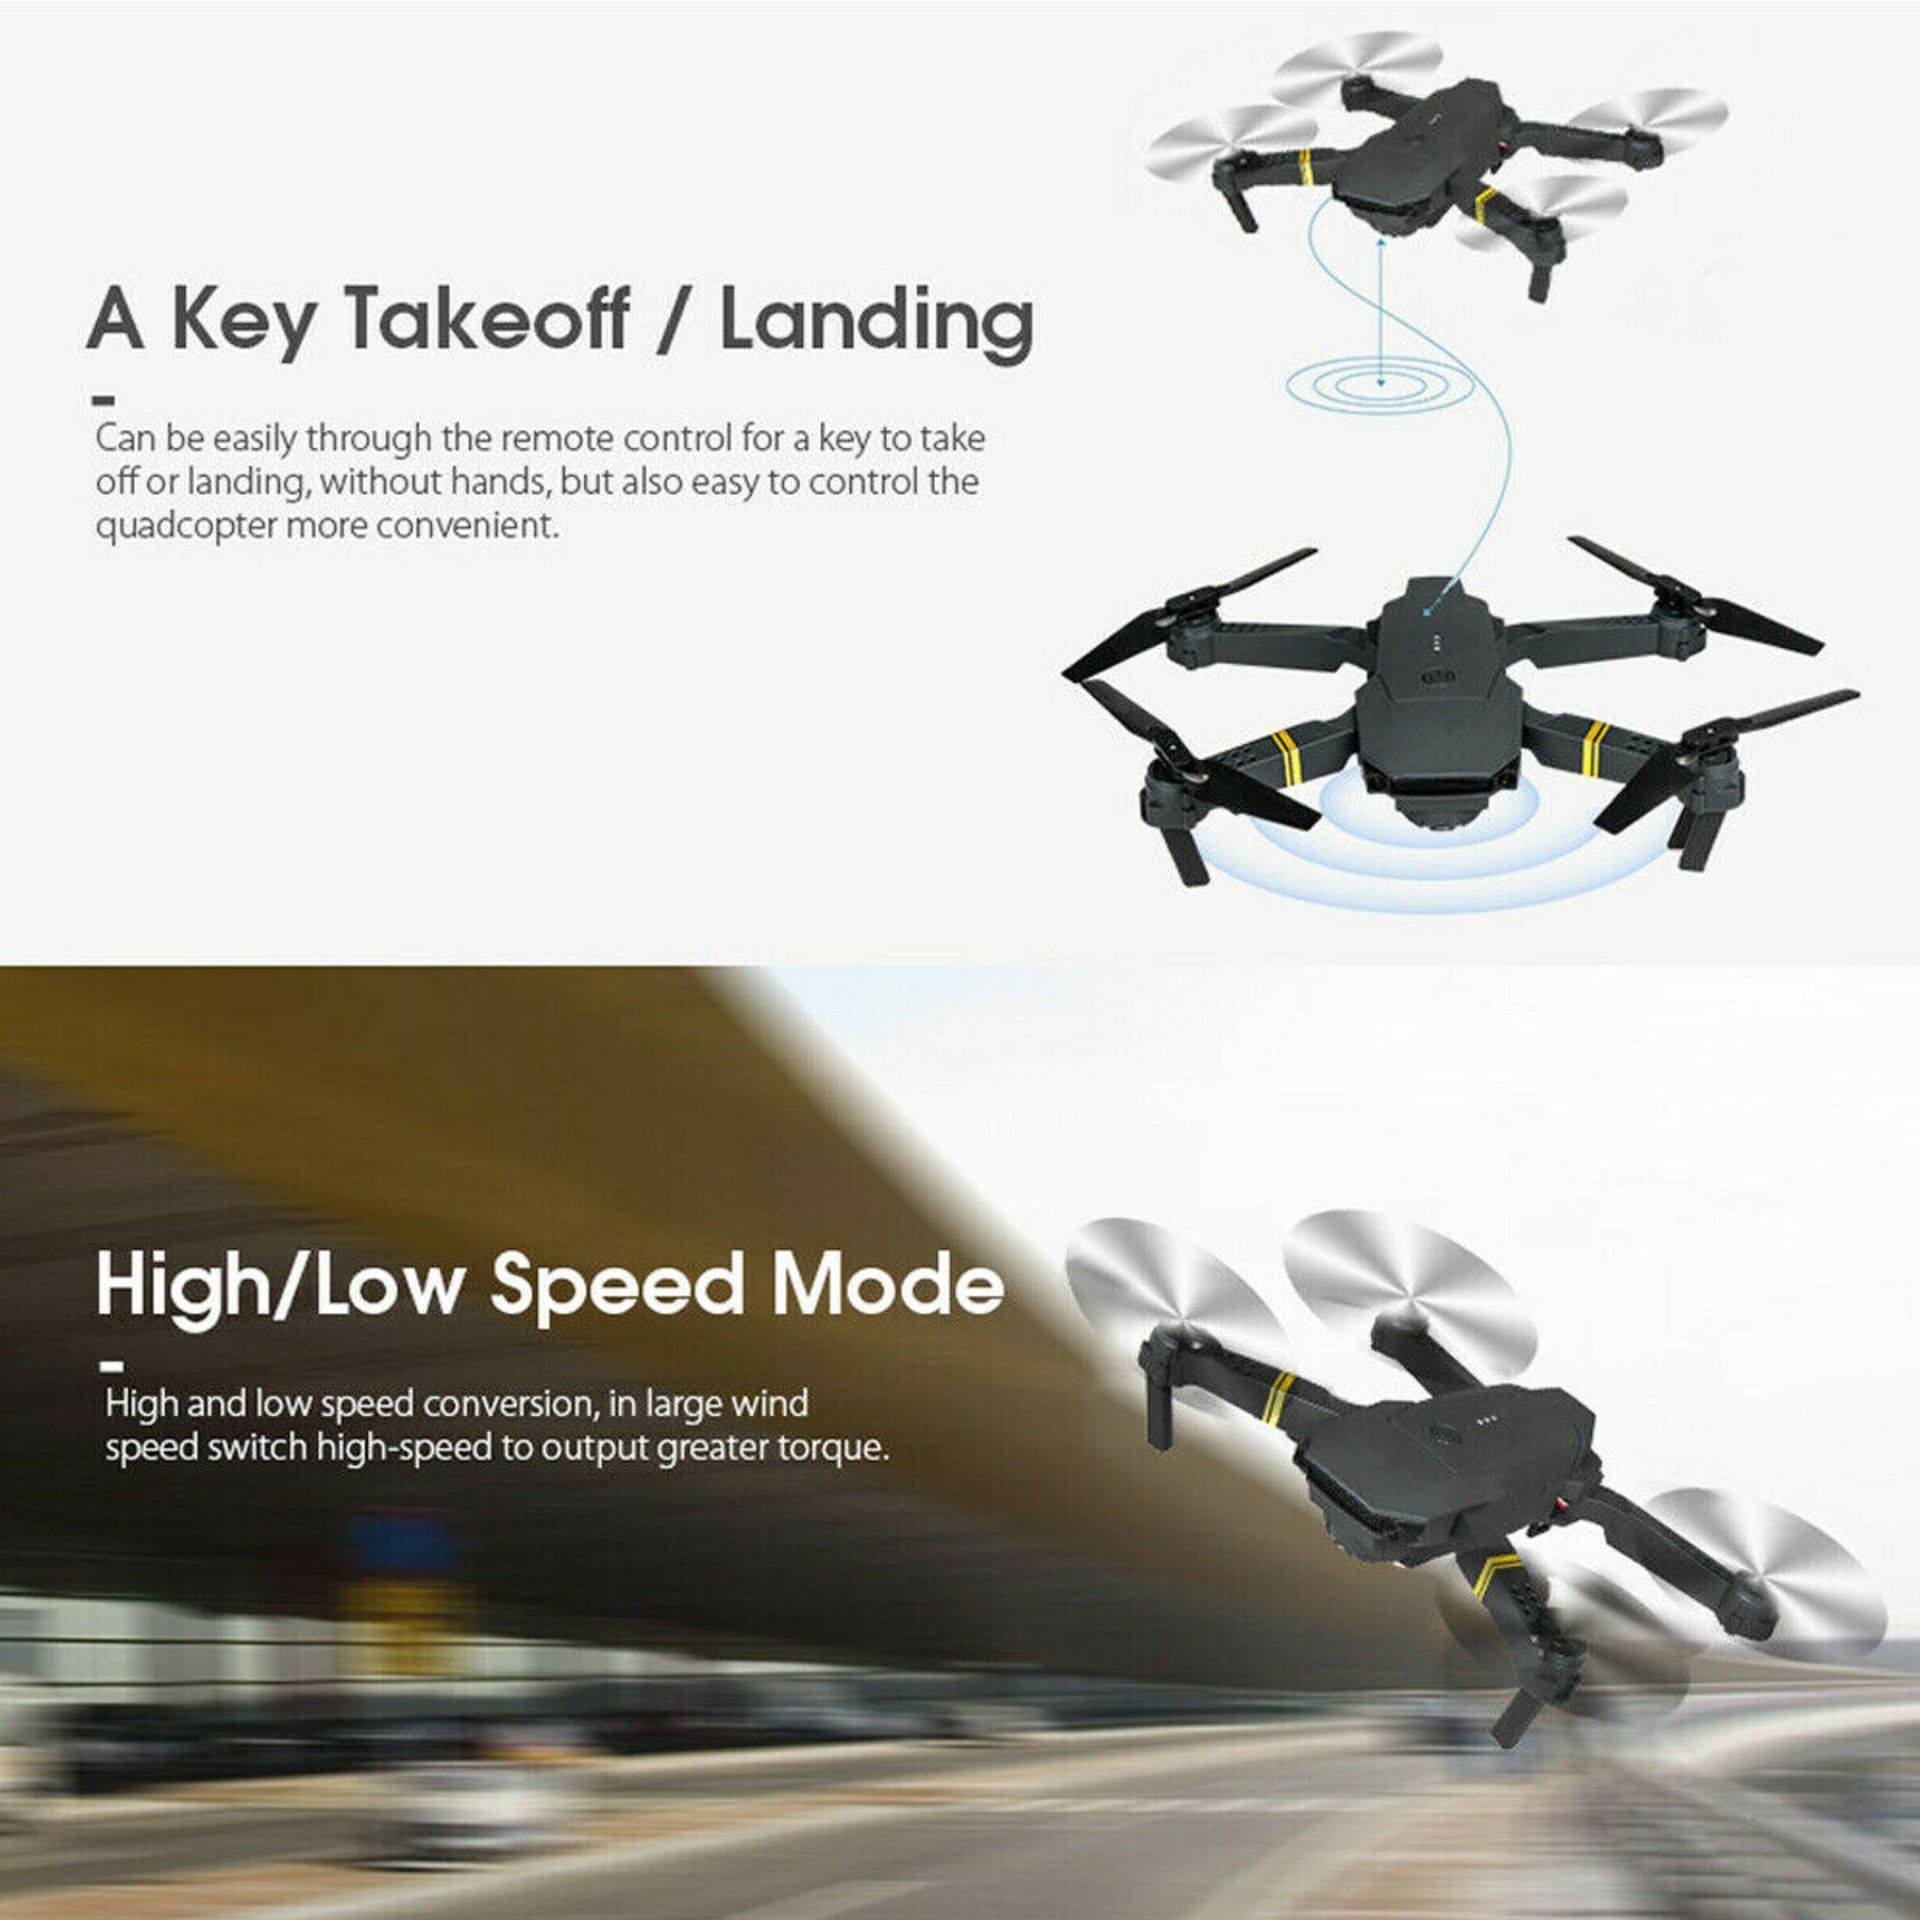 NEW & UNUSED DRONE X PRO WIFI FPV 1080p HD CAMERA FOLDABLE RC QUADCOPTER + CASE/ BAG *NO VAT* - Image 5 of 11